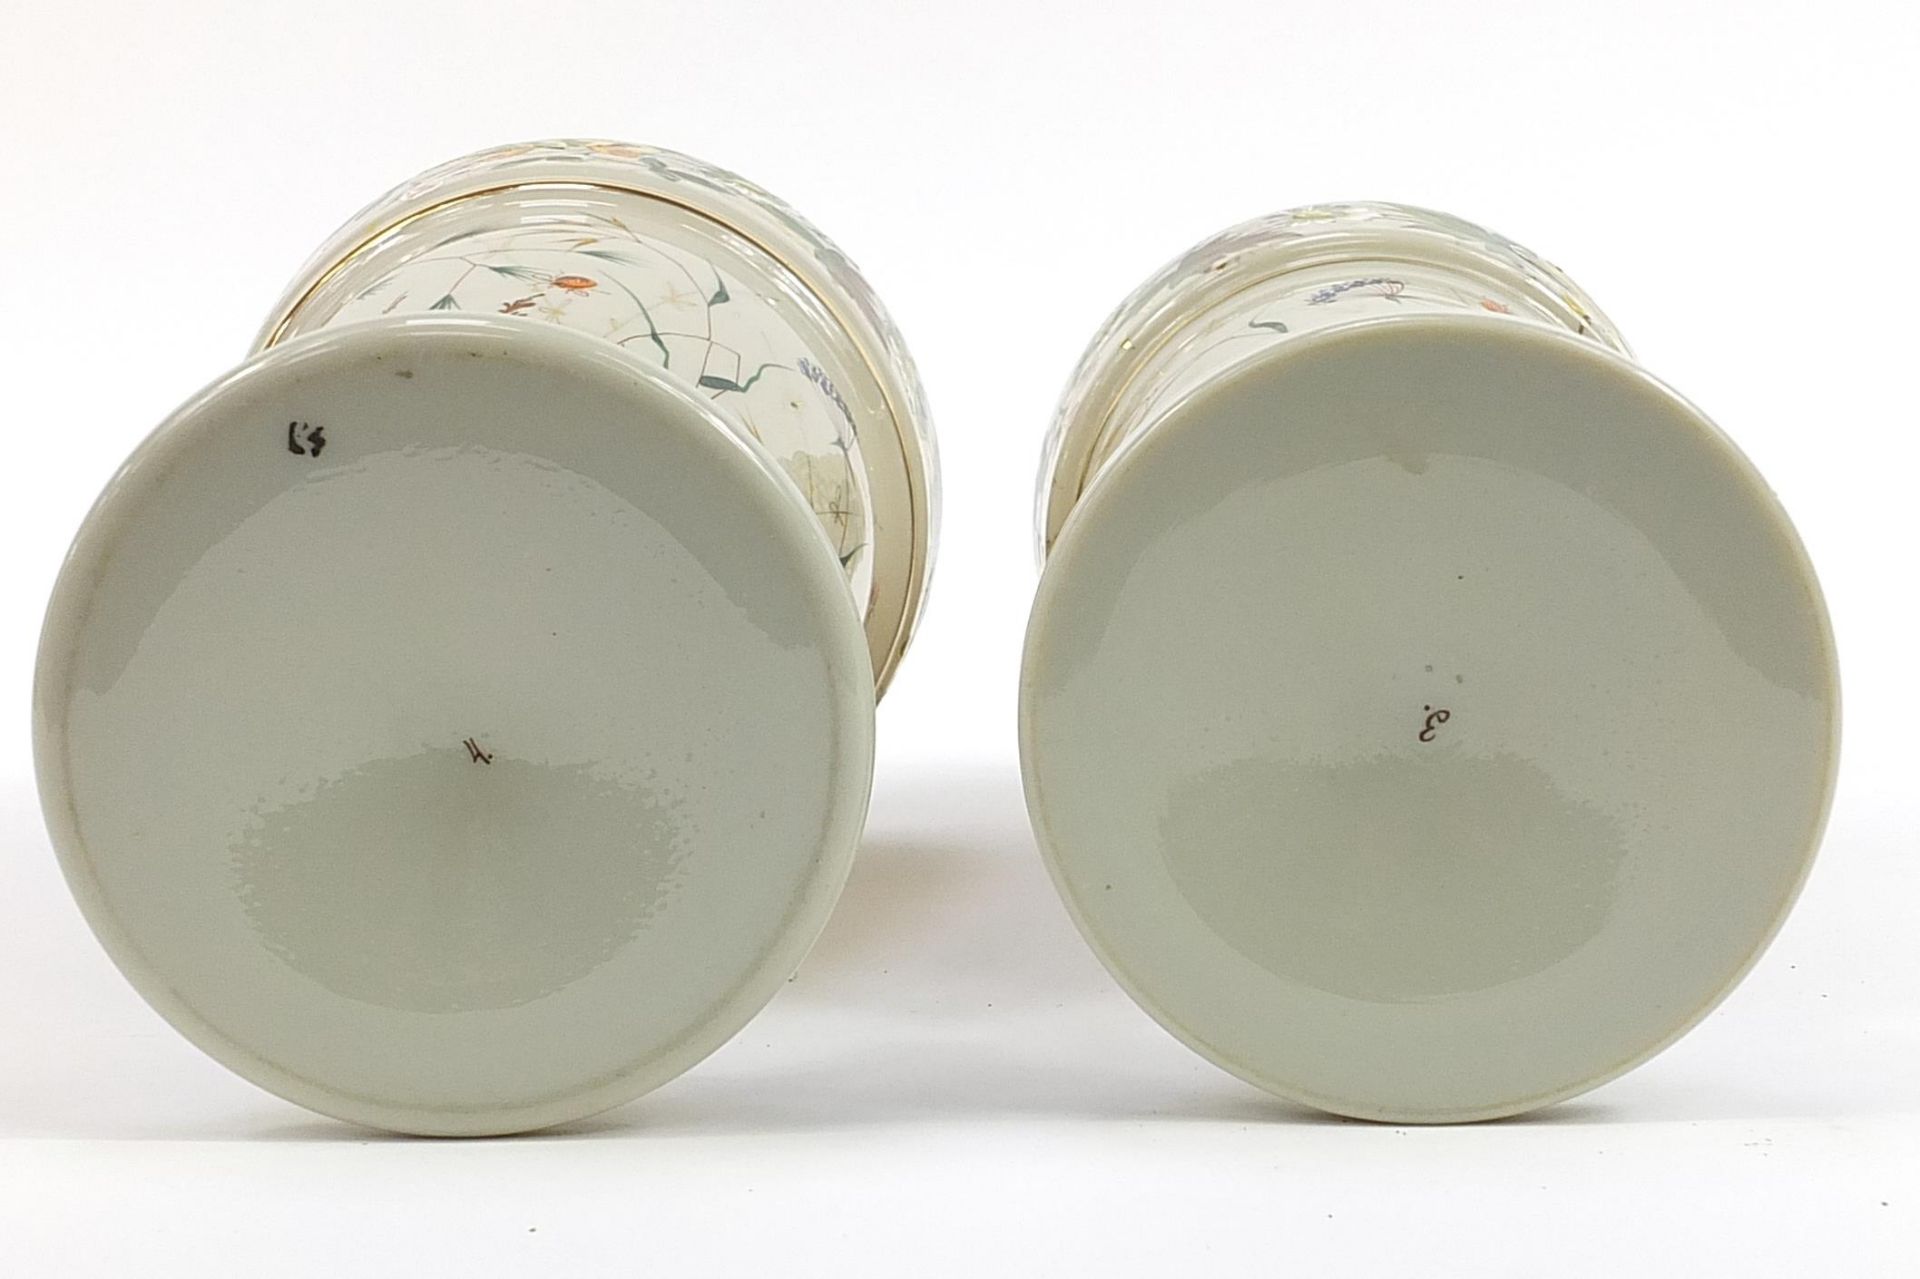 Matched pair of 19th century opaline glass vases, hand painted with flowers and insects amongst - Image 6 of 11